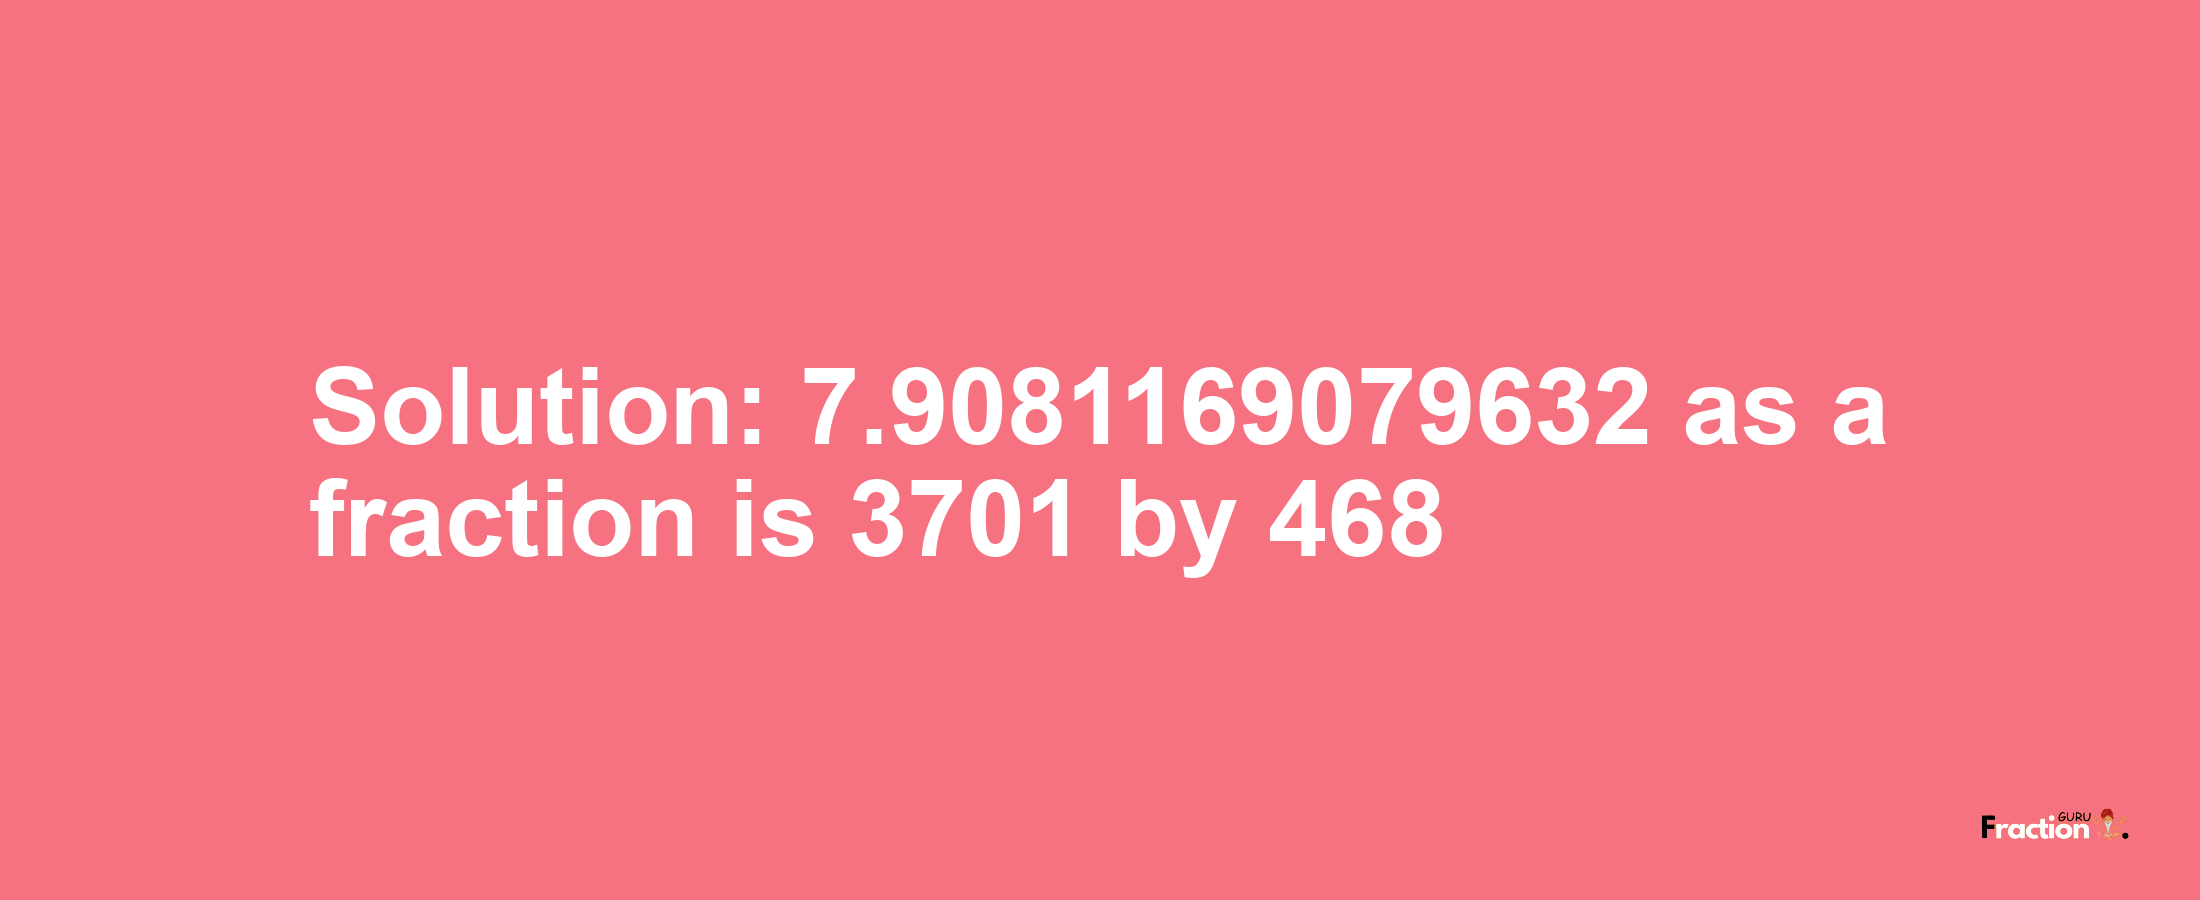 Solution:7.9081169079632 as a fraction is 3701/468